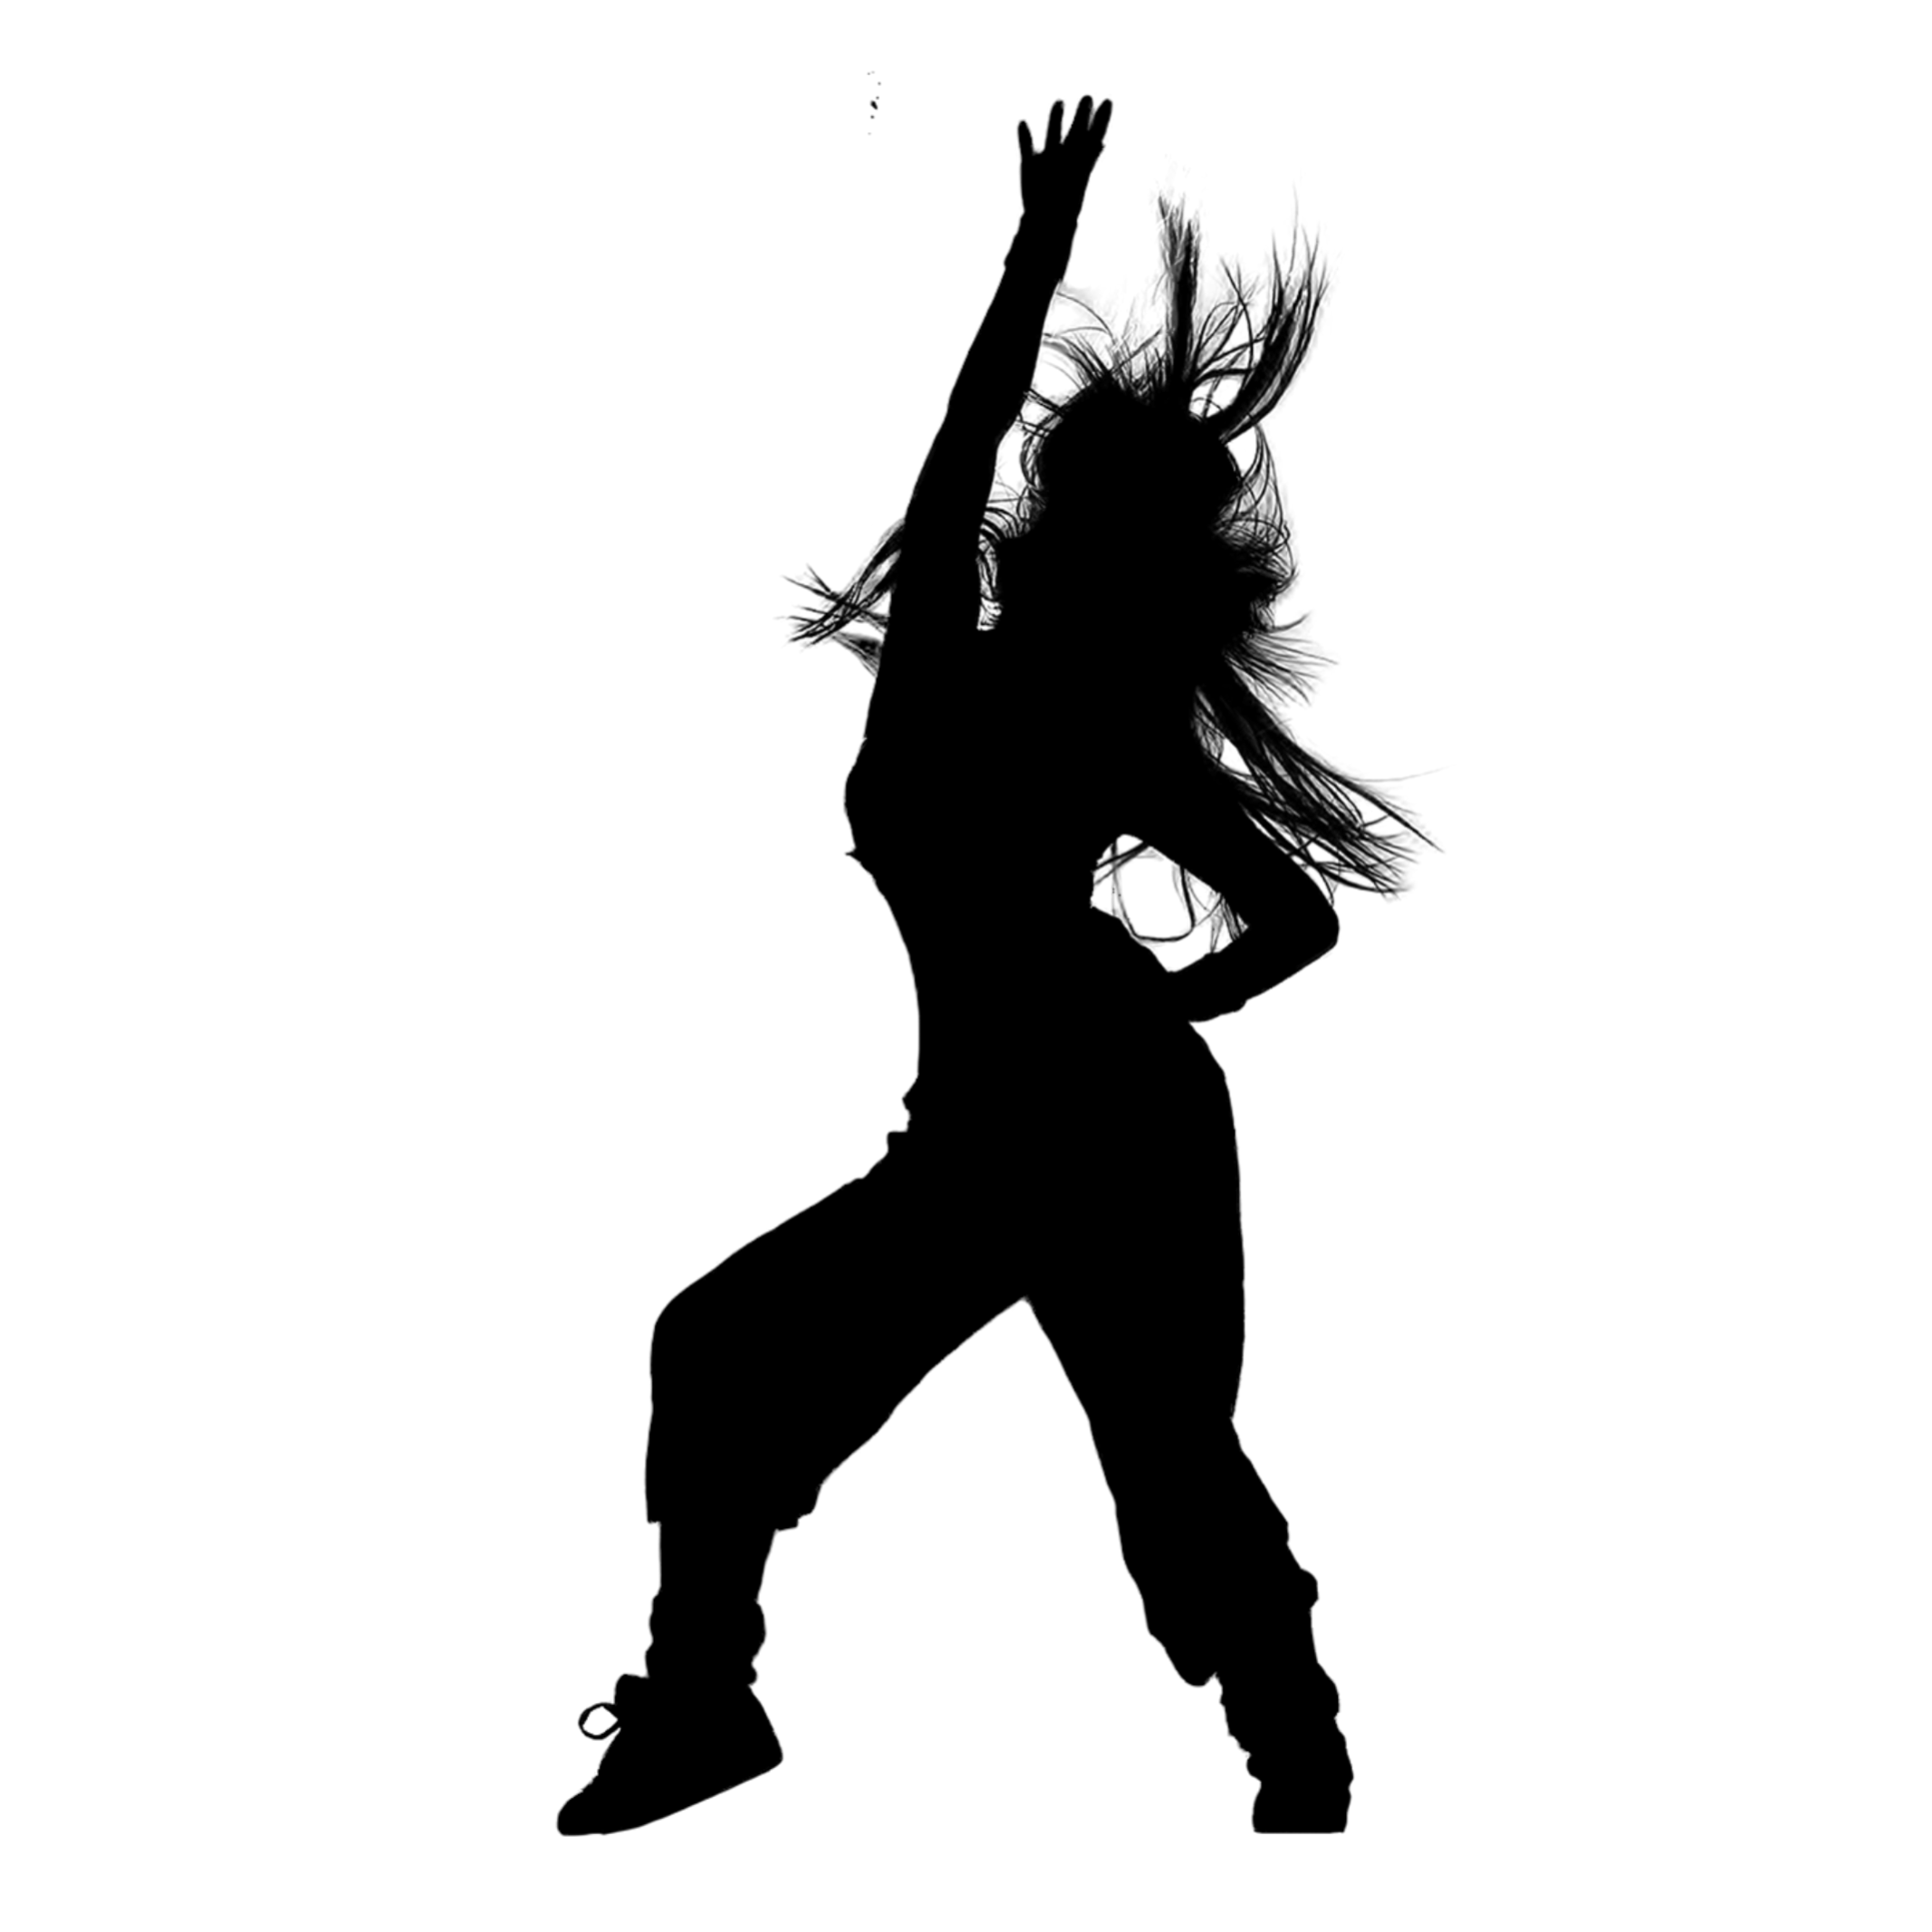 This visual is about dancer dancing dance music girl freetoedit #dancer #da...